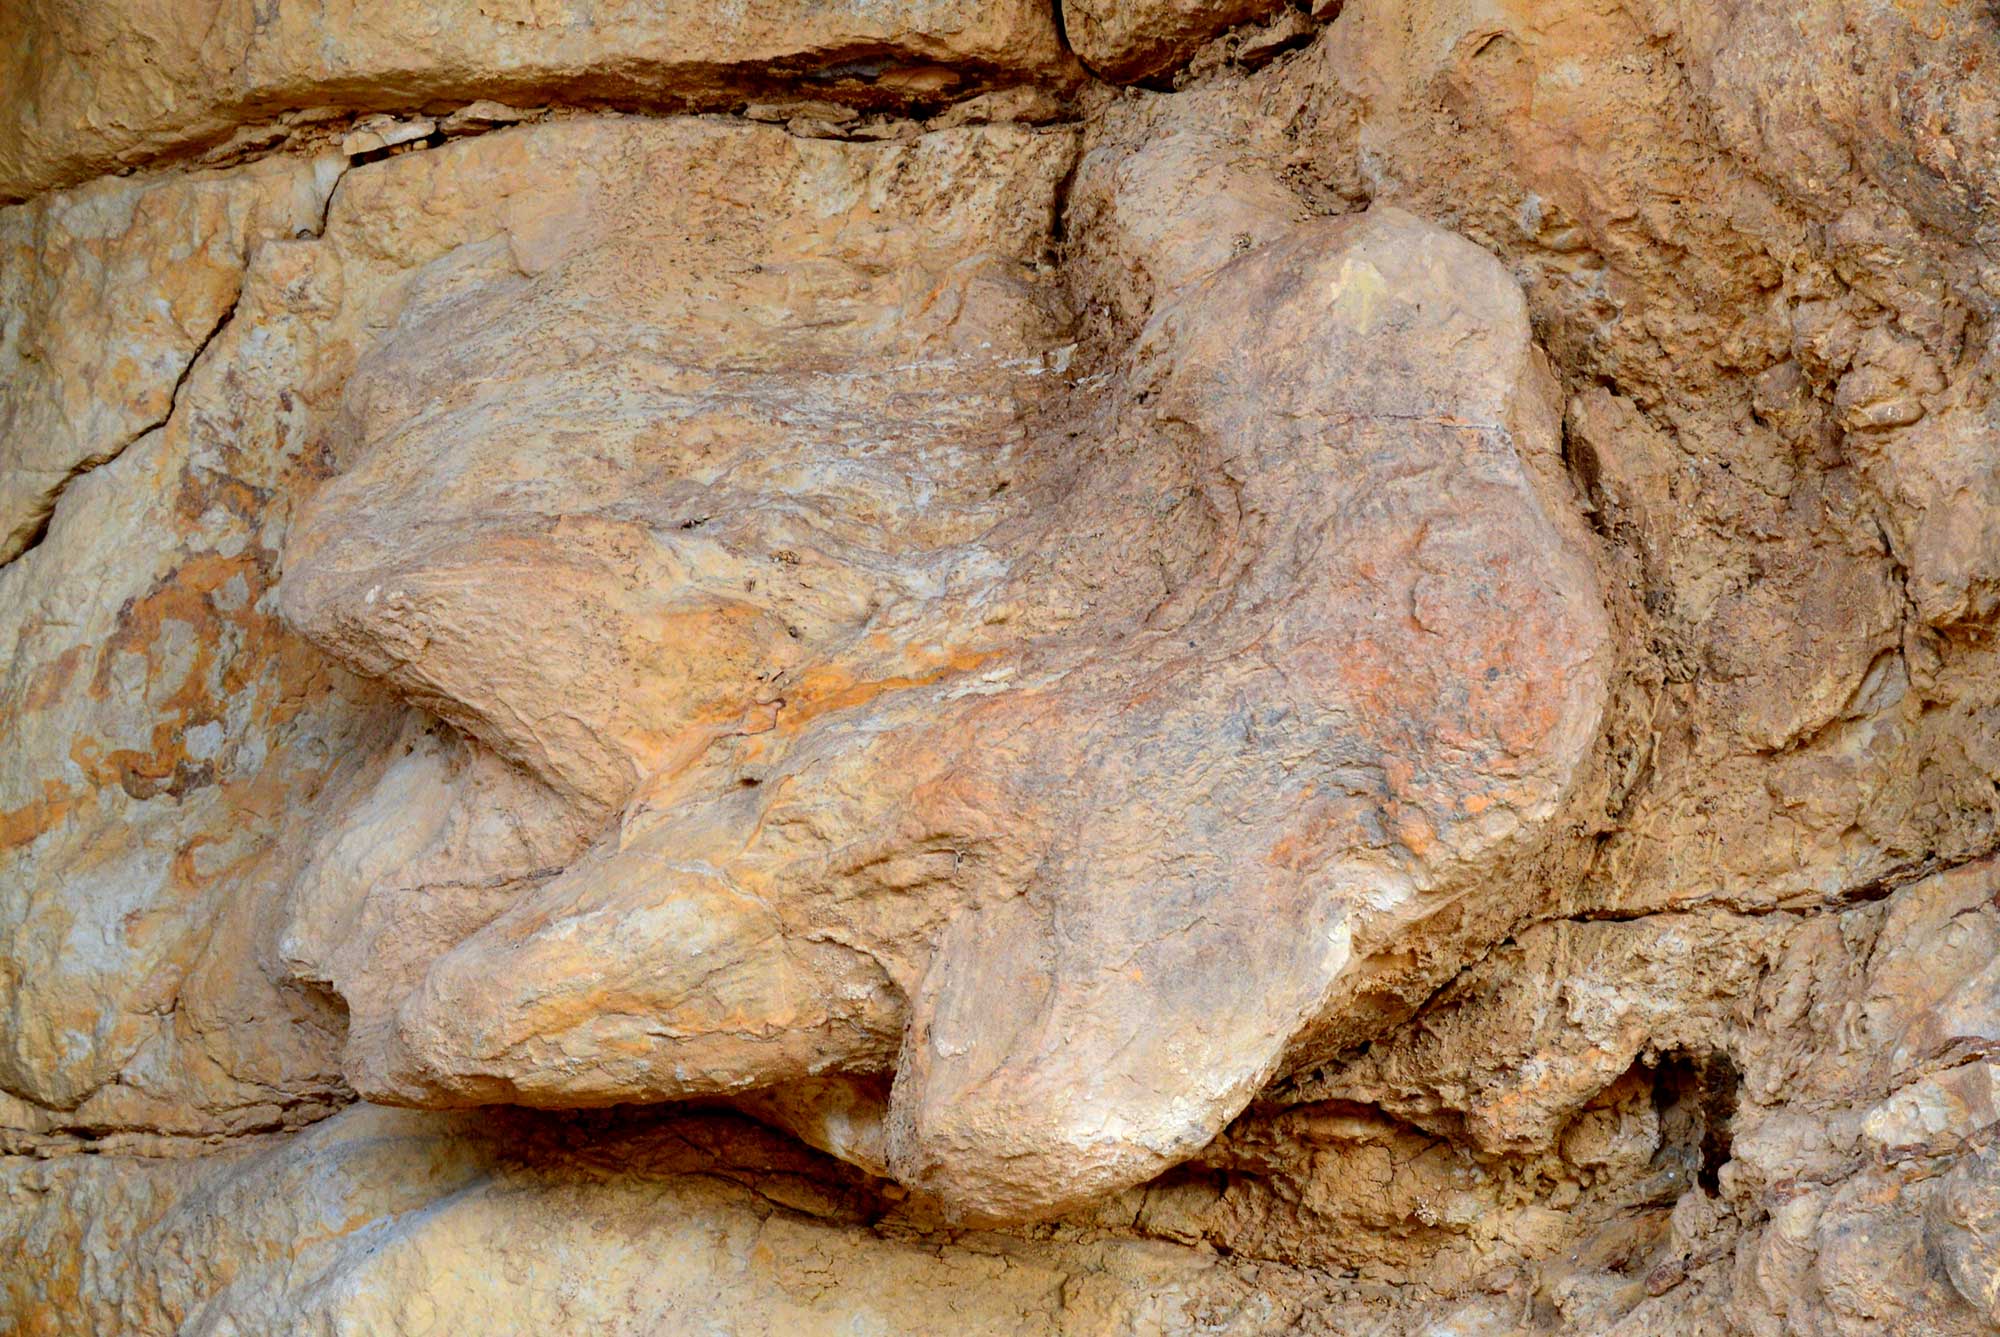 Photograph of a Cretaceous dinosaur track from Colorado. The track is in light orangish-brown rock. In appears to have three toes, although it is a little distorted.